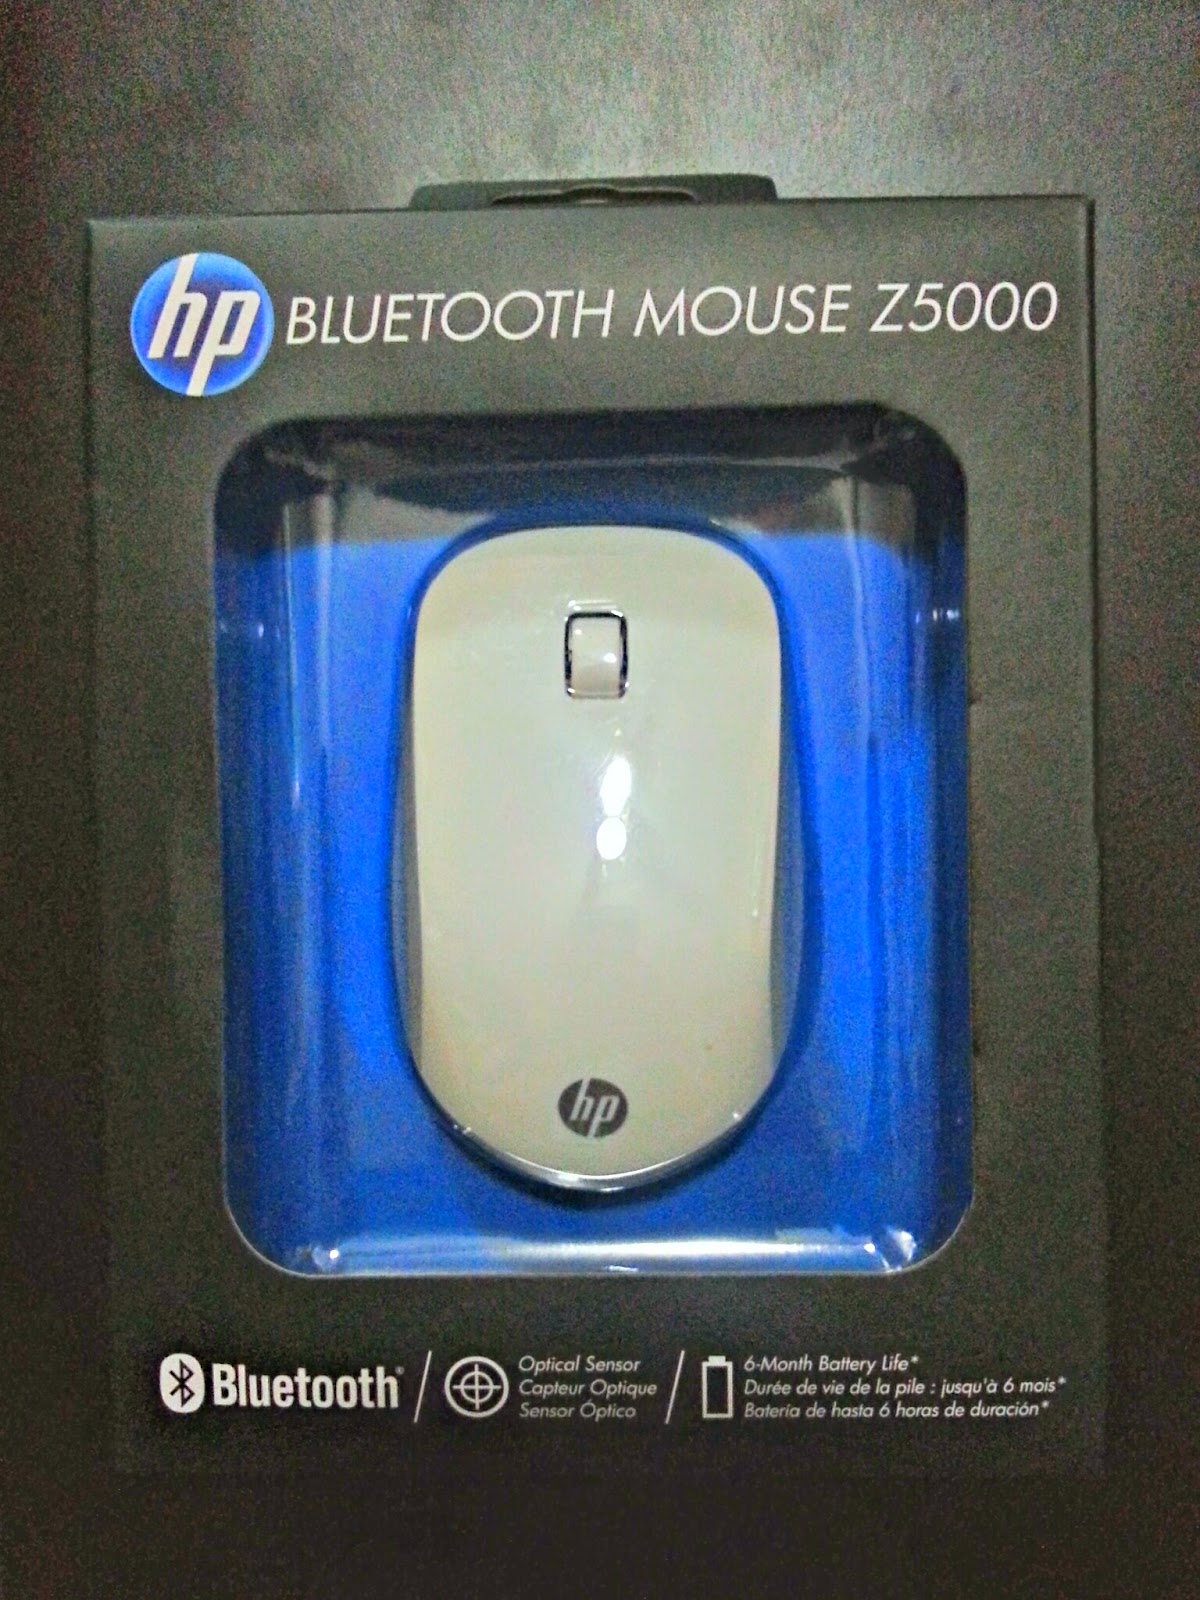 HP Wi-Fi Mobile Mouse Review